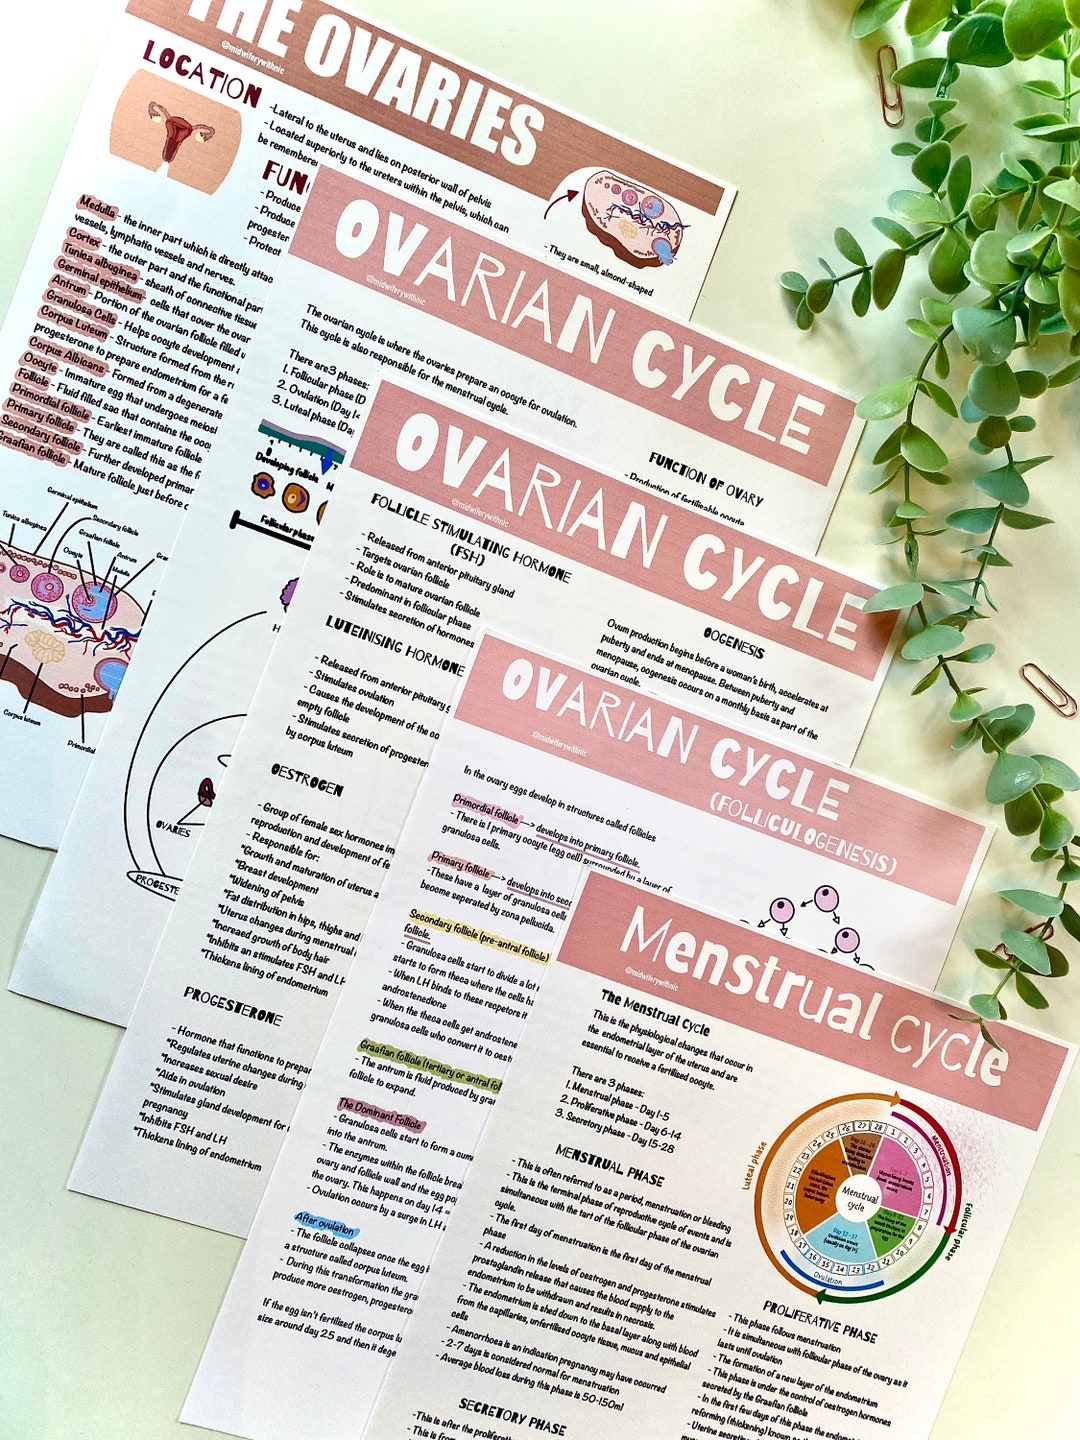 Ovarian and Menstrual Cycle Posters Student Midwife photo photo